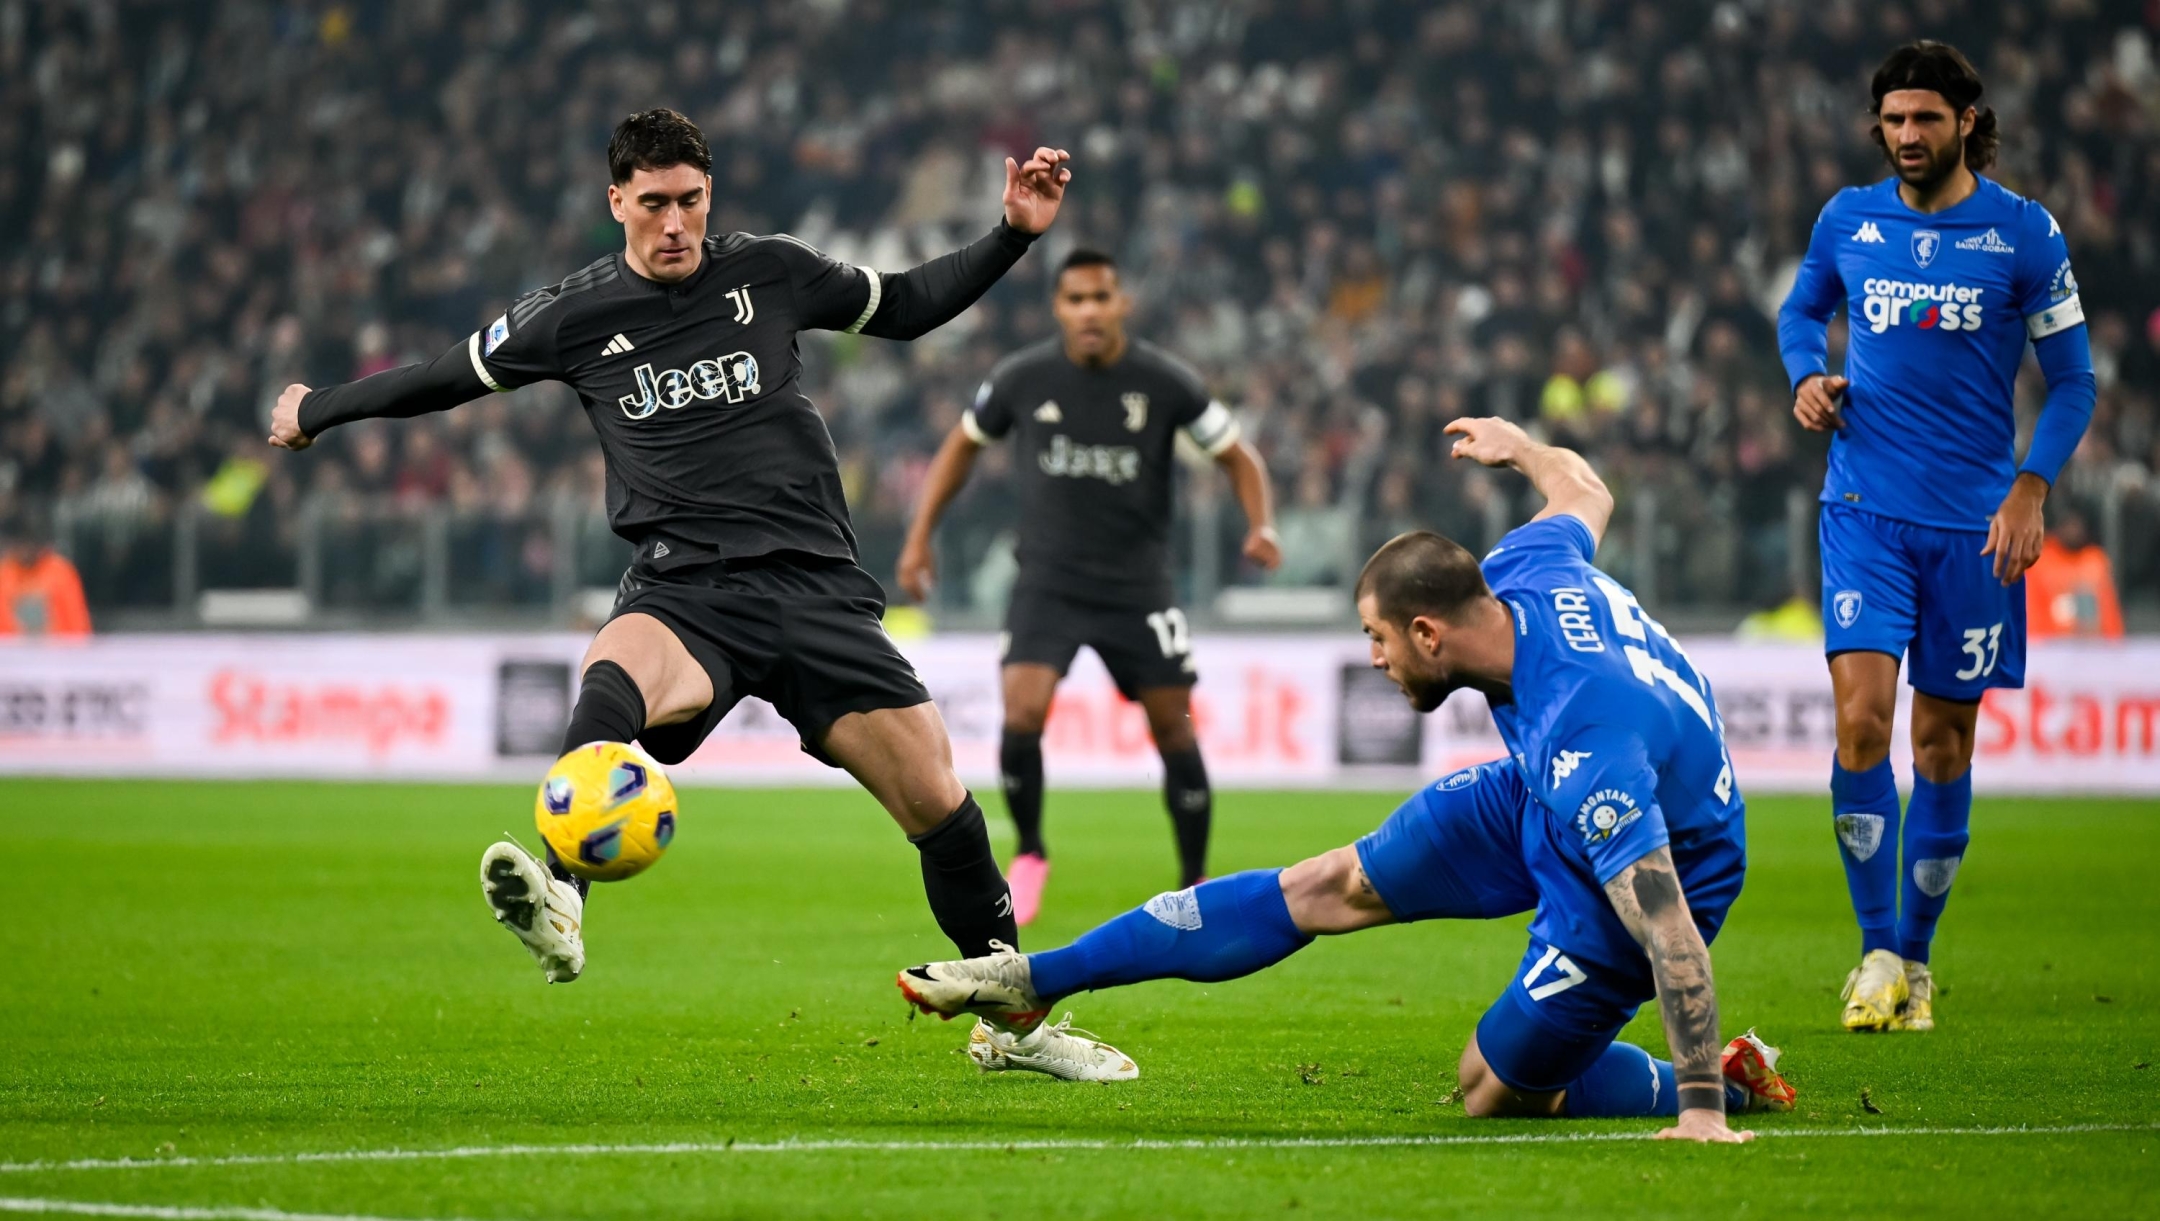 TURIN, ITALY - JANUARY 27: Dusan Vlahovic of Juventus is challenged by Alberto Cerri of Empoli during the Serie A TIM match between Juventus and Empoli FC at Allianz Stadium on January 27, 2024 in Turin, Italy. (Photo by Daniele Badolato - Juventus FC/Juventus FC via Getty Images)